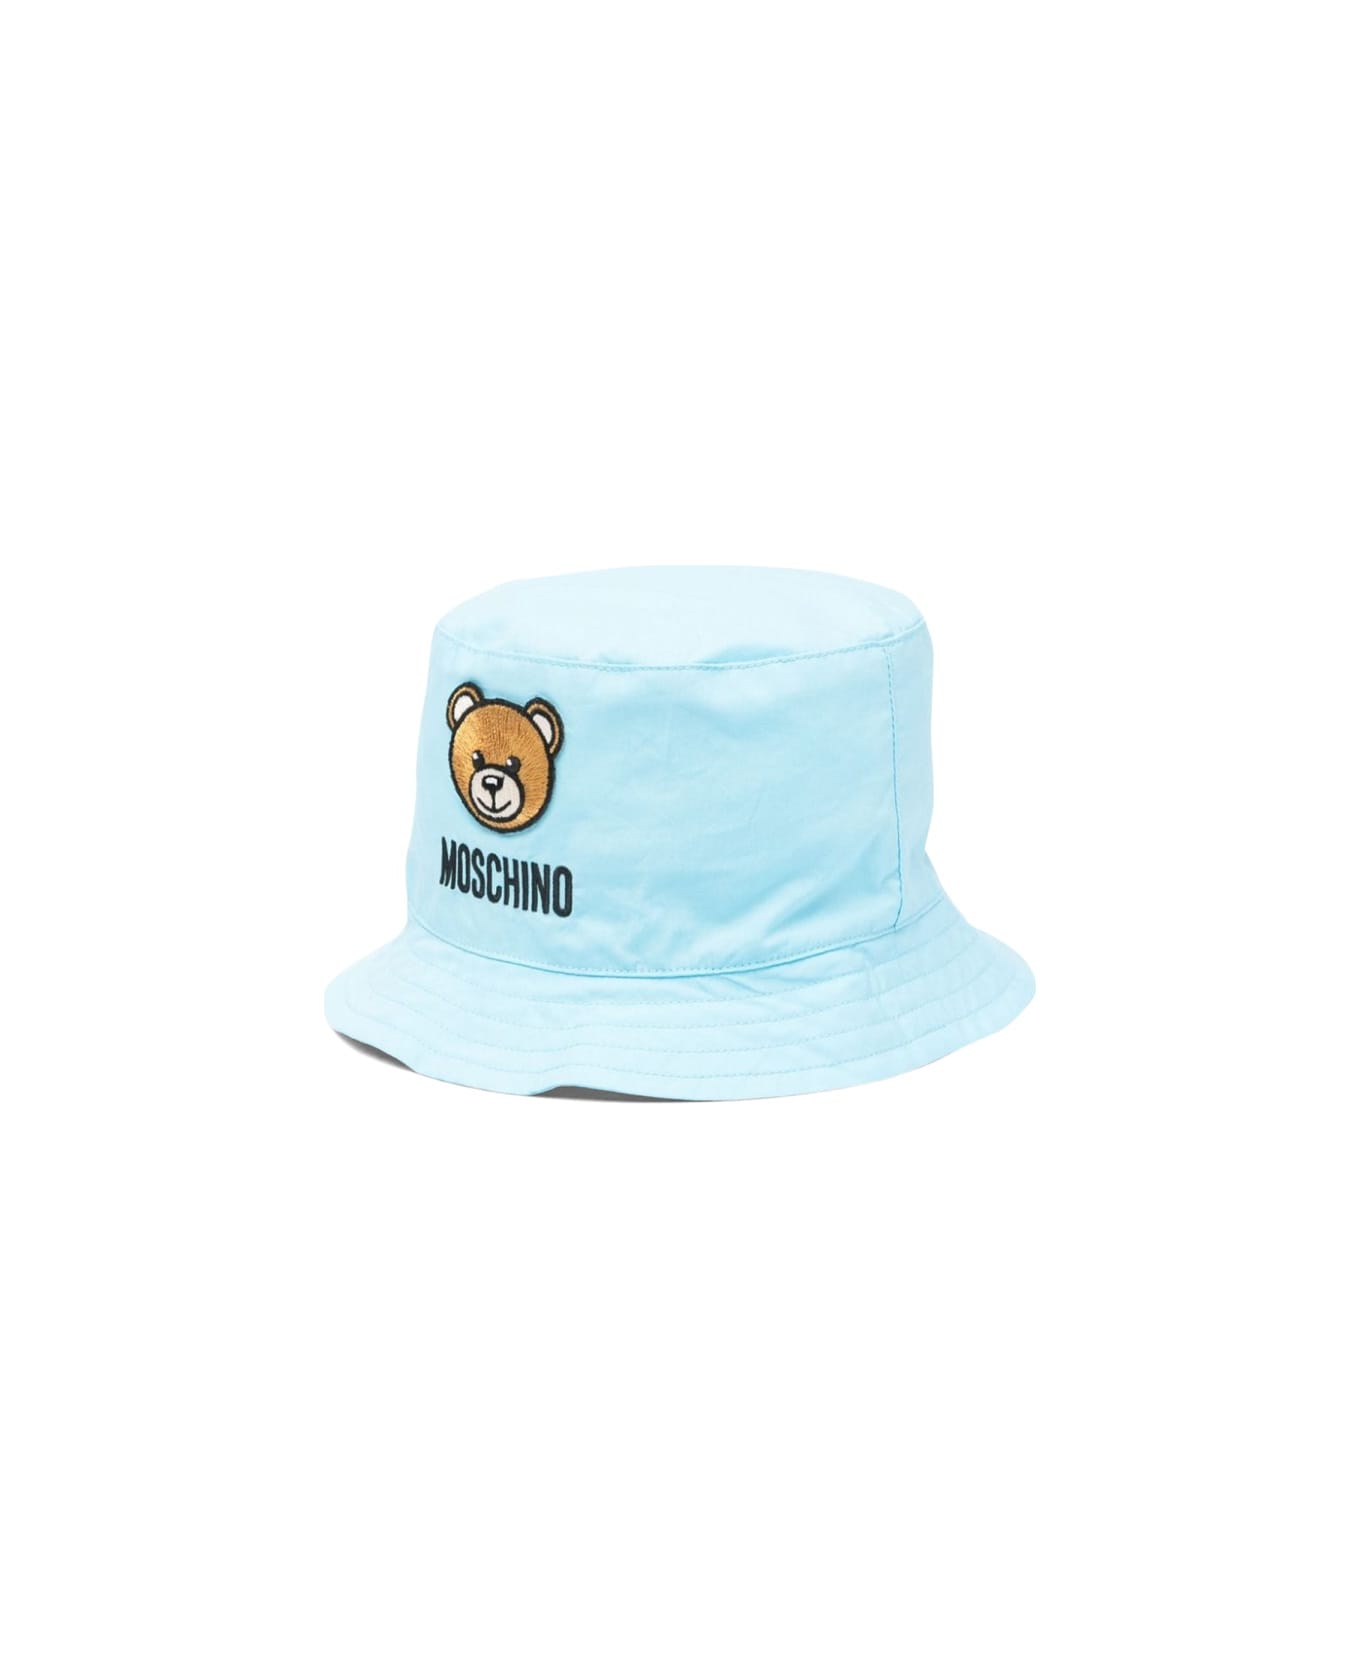 Moschino Hat With Gift Box - BLUE